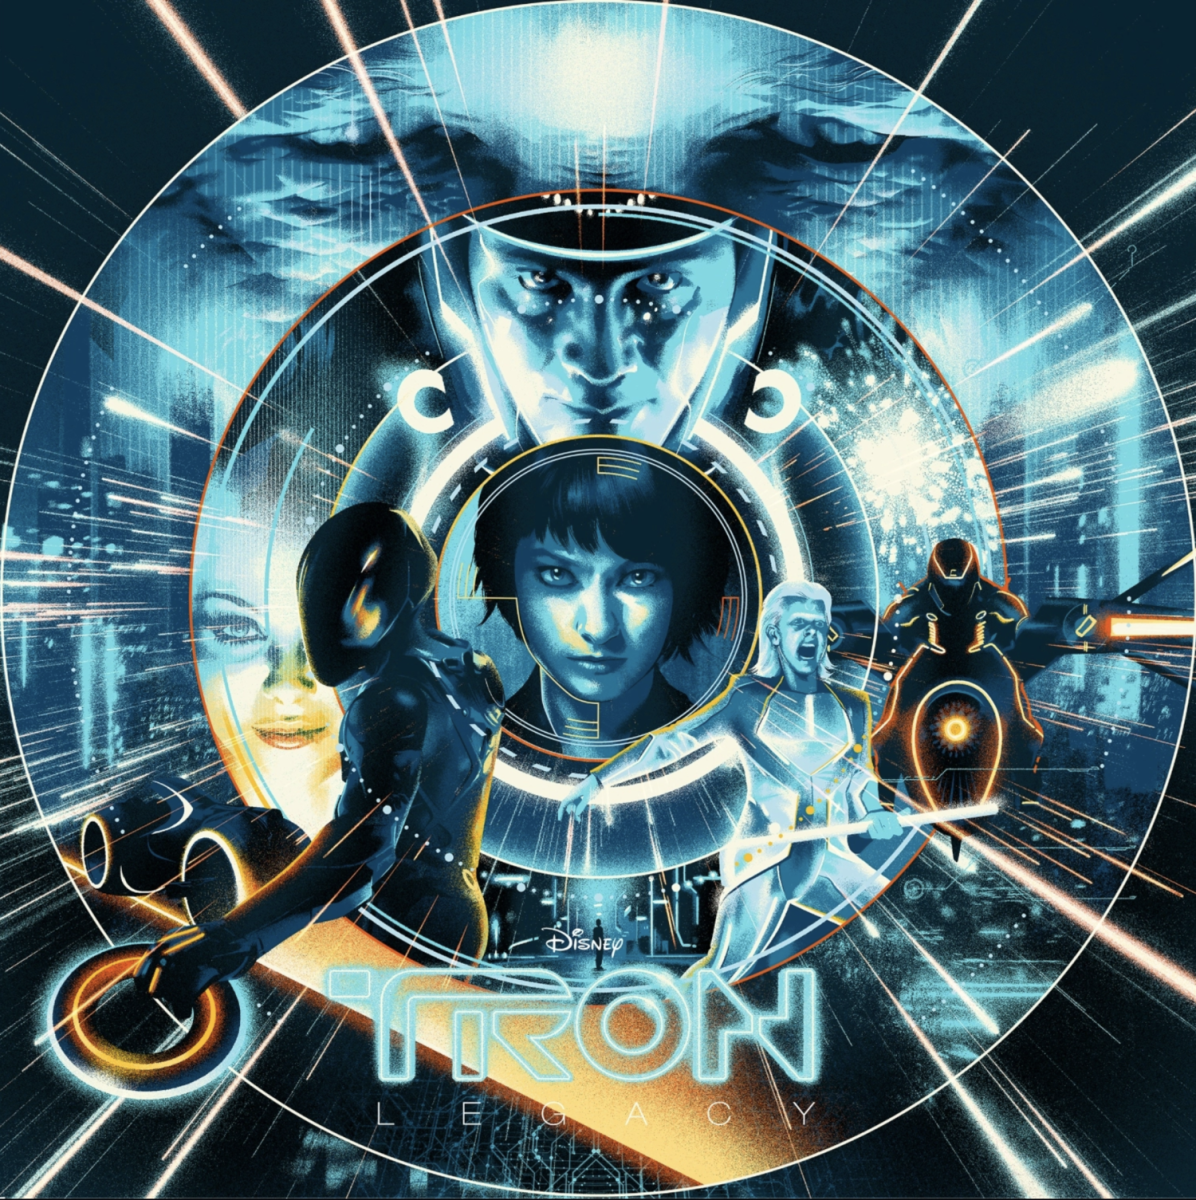 daft-punks-tron-legacy-soundtrack-is-getting-a-vinyl-release-from-mondo1